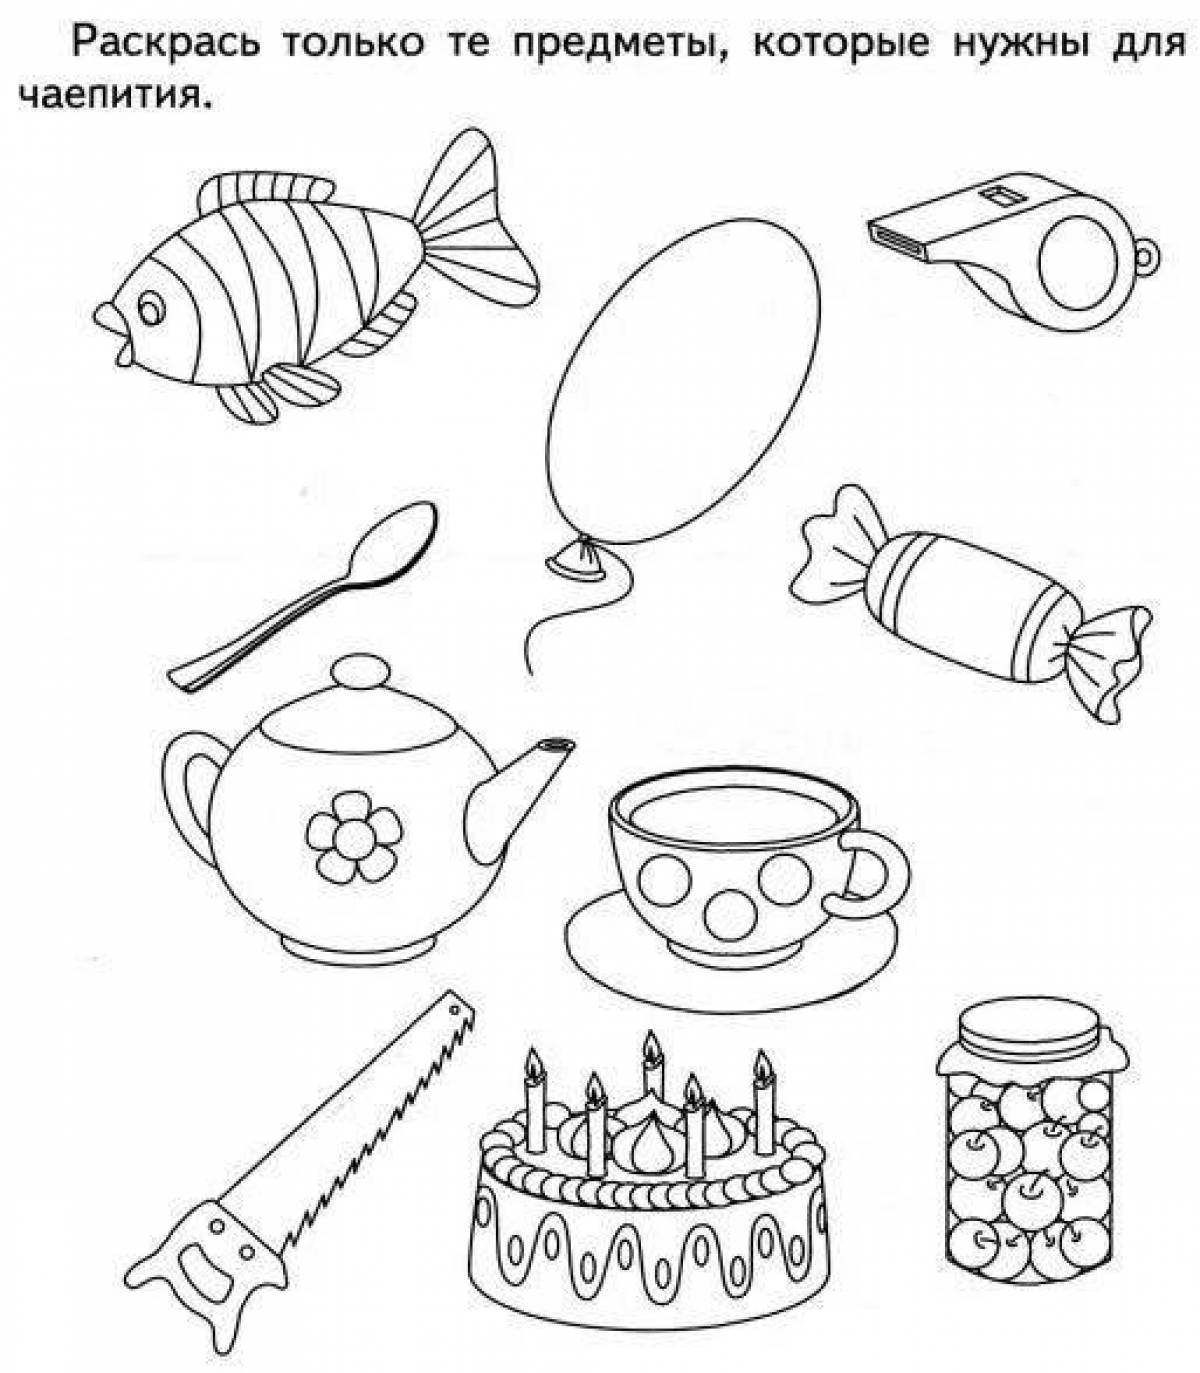 Colorful coloring book for preschoolers with tasks